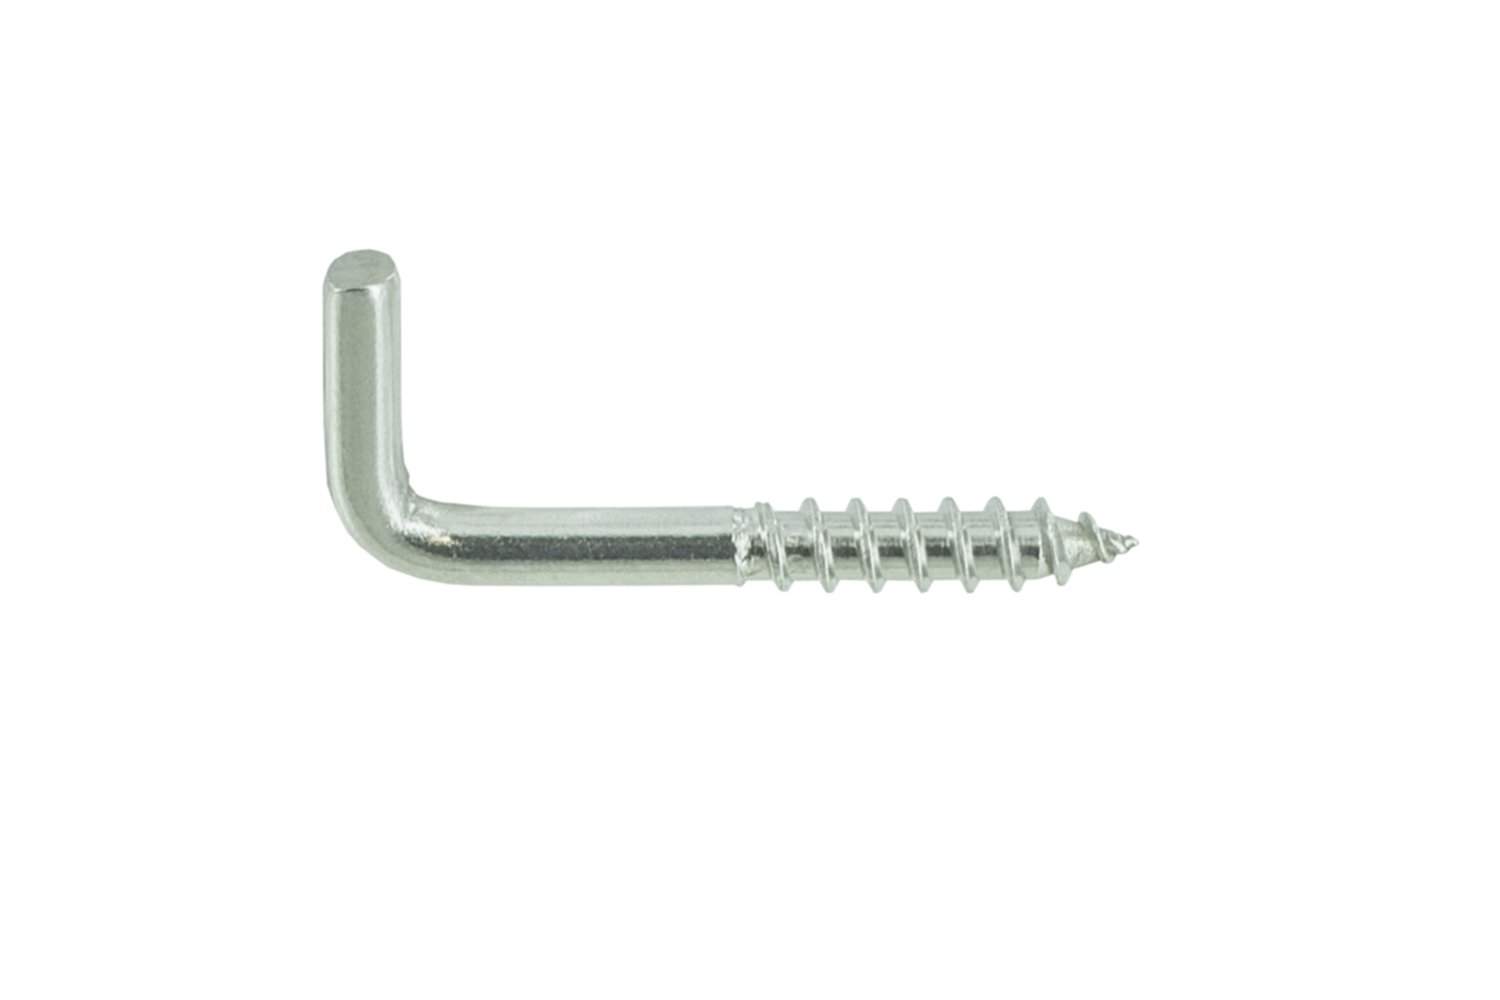 A2 stainless steel screw hinge, 4x40mm, 6 pcs.